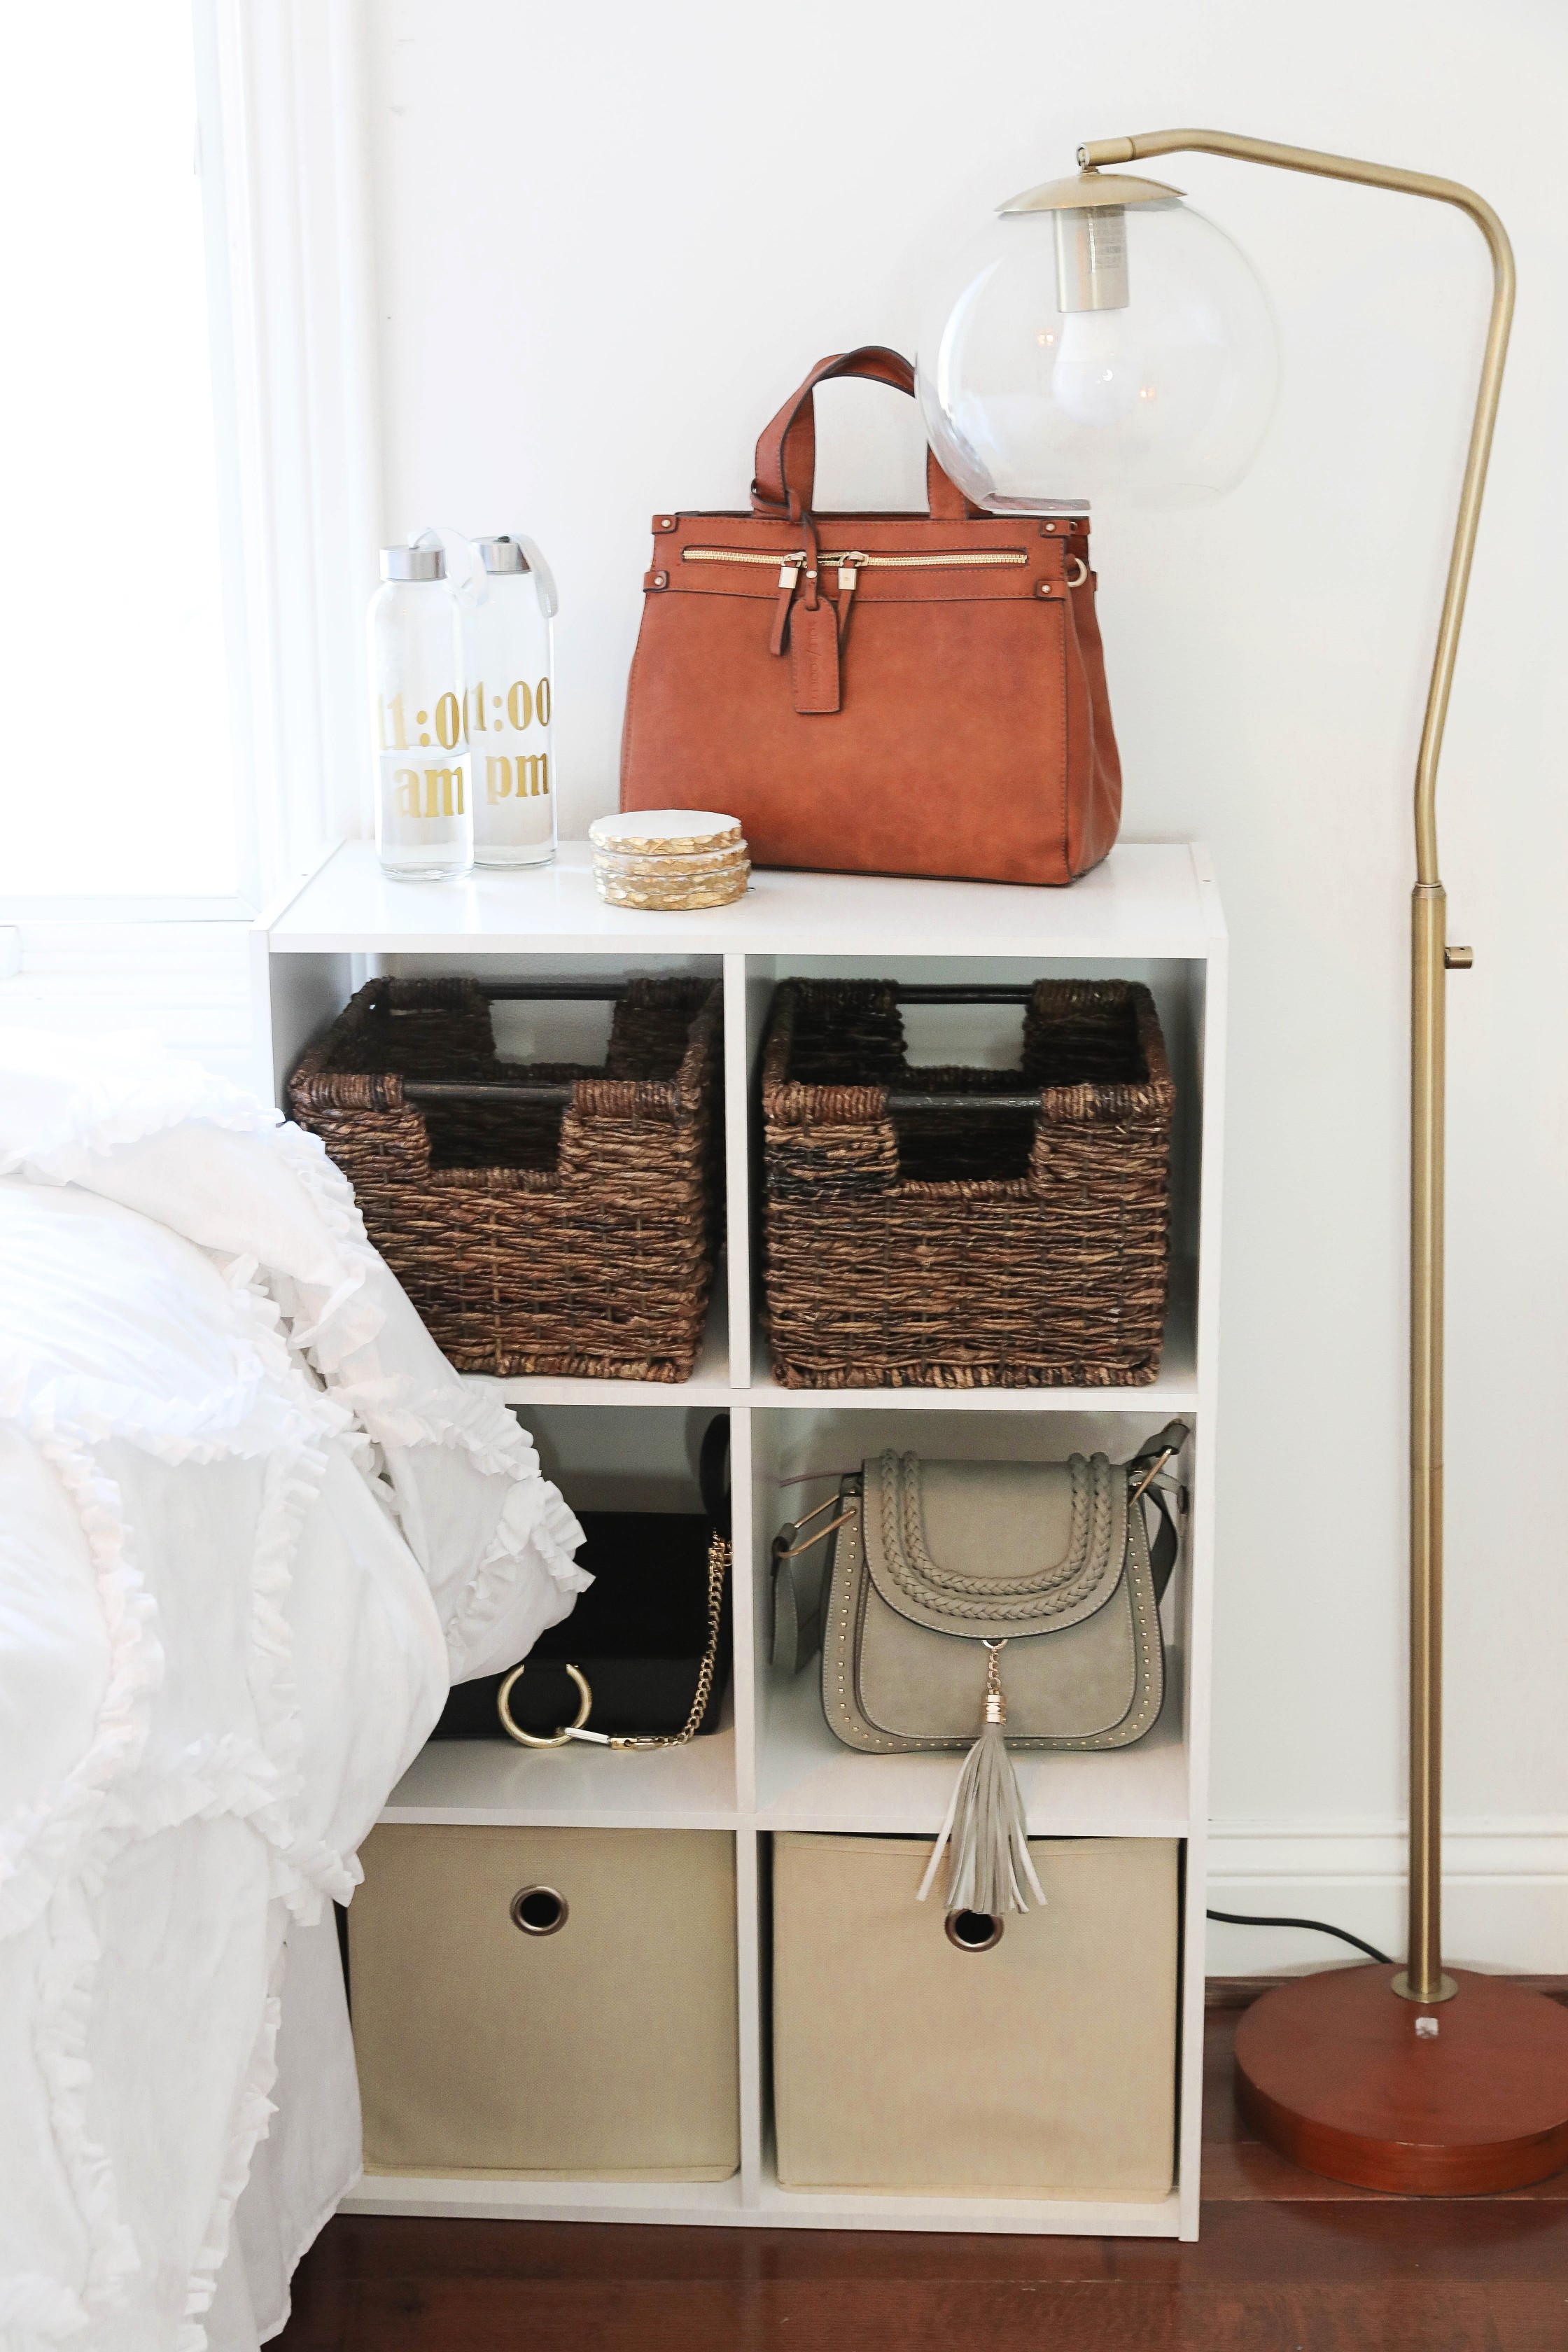 Room decluttering tips! Total closet clean out to live a minimal lifestyle. Spring cleaning means getting rid of clutter! Insane before and after photos of decluttering on lifestyle blog daily dose of charm by lauren lindmark